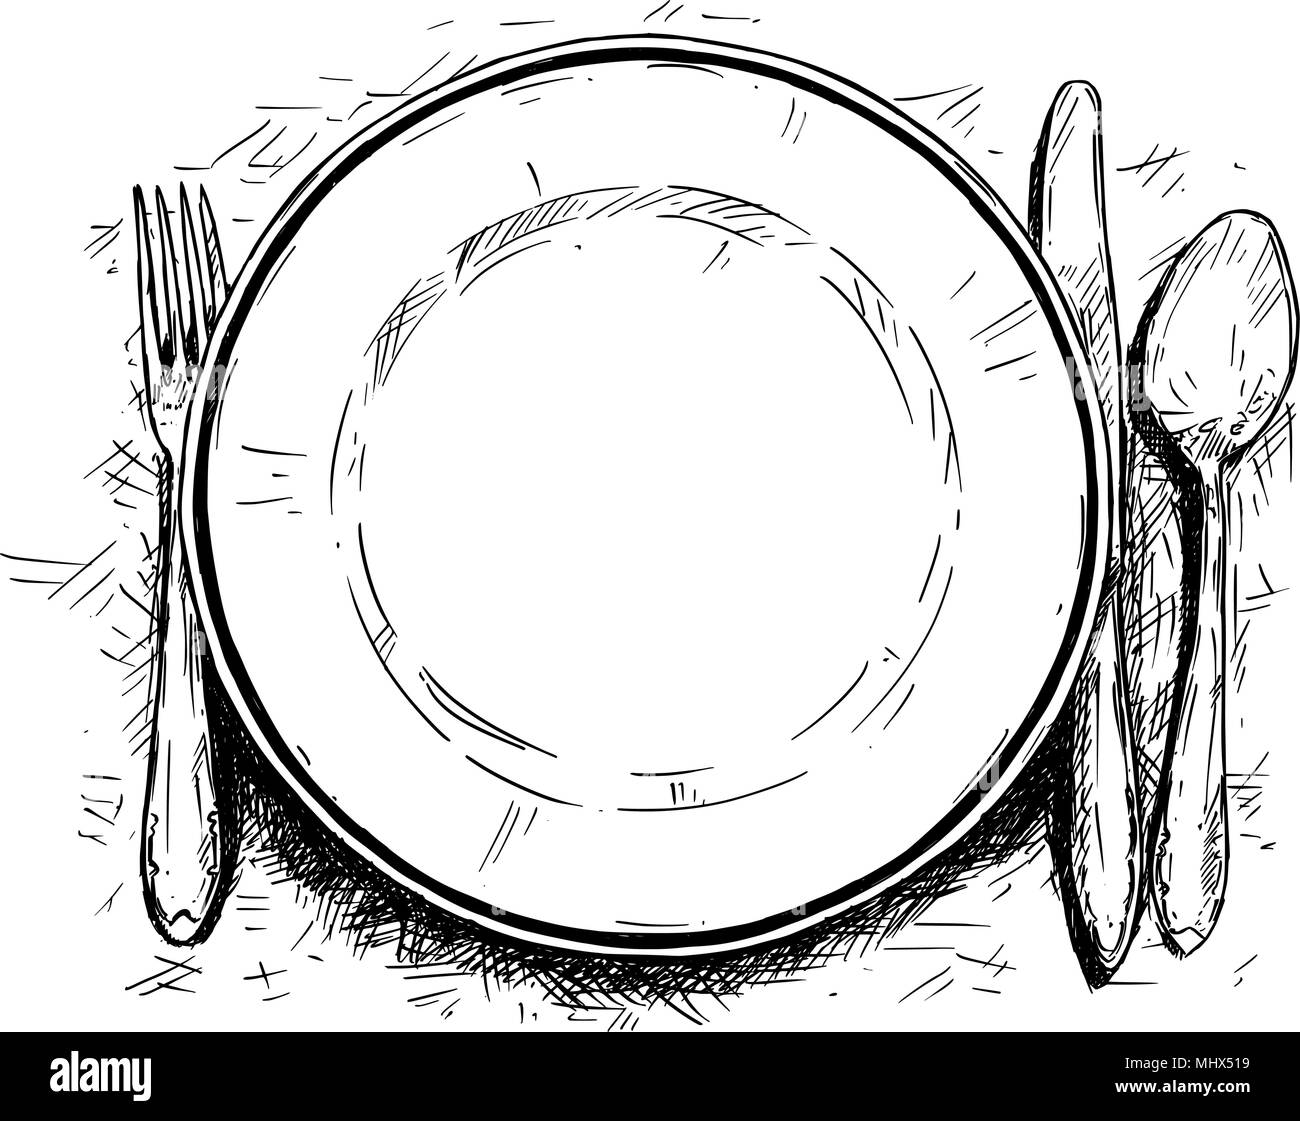 Vector Artistic Illustration or Drawing of Empty Plate, Knife and Fork Stock Vector